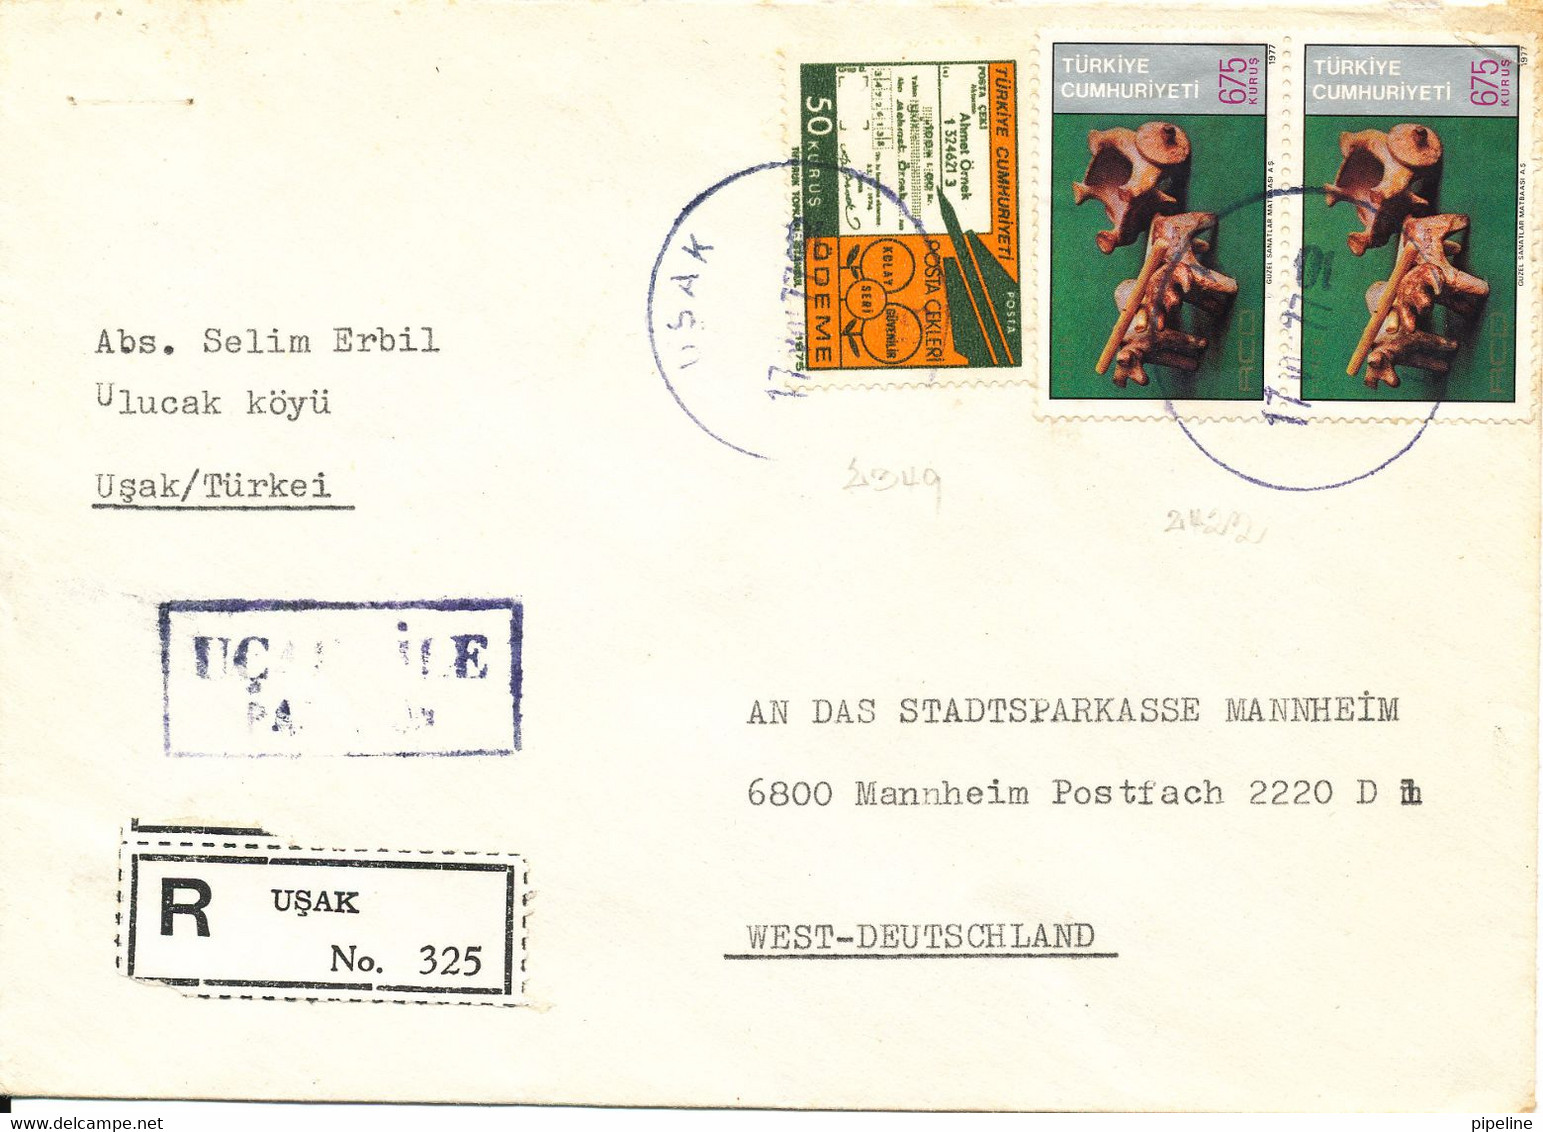 Turkey Registered Cover Sent Air Mail To Germany 17-8-1977 - Briefe U. Dokumente